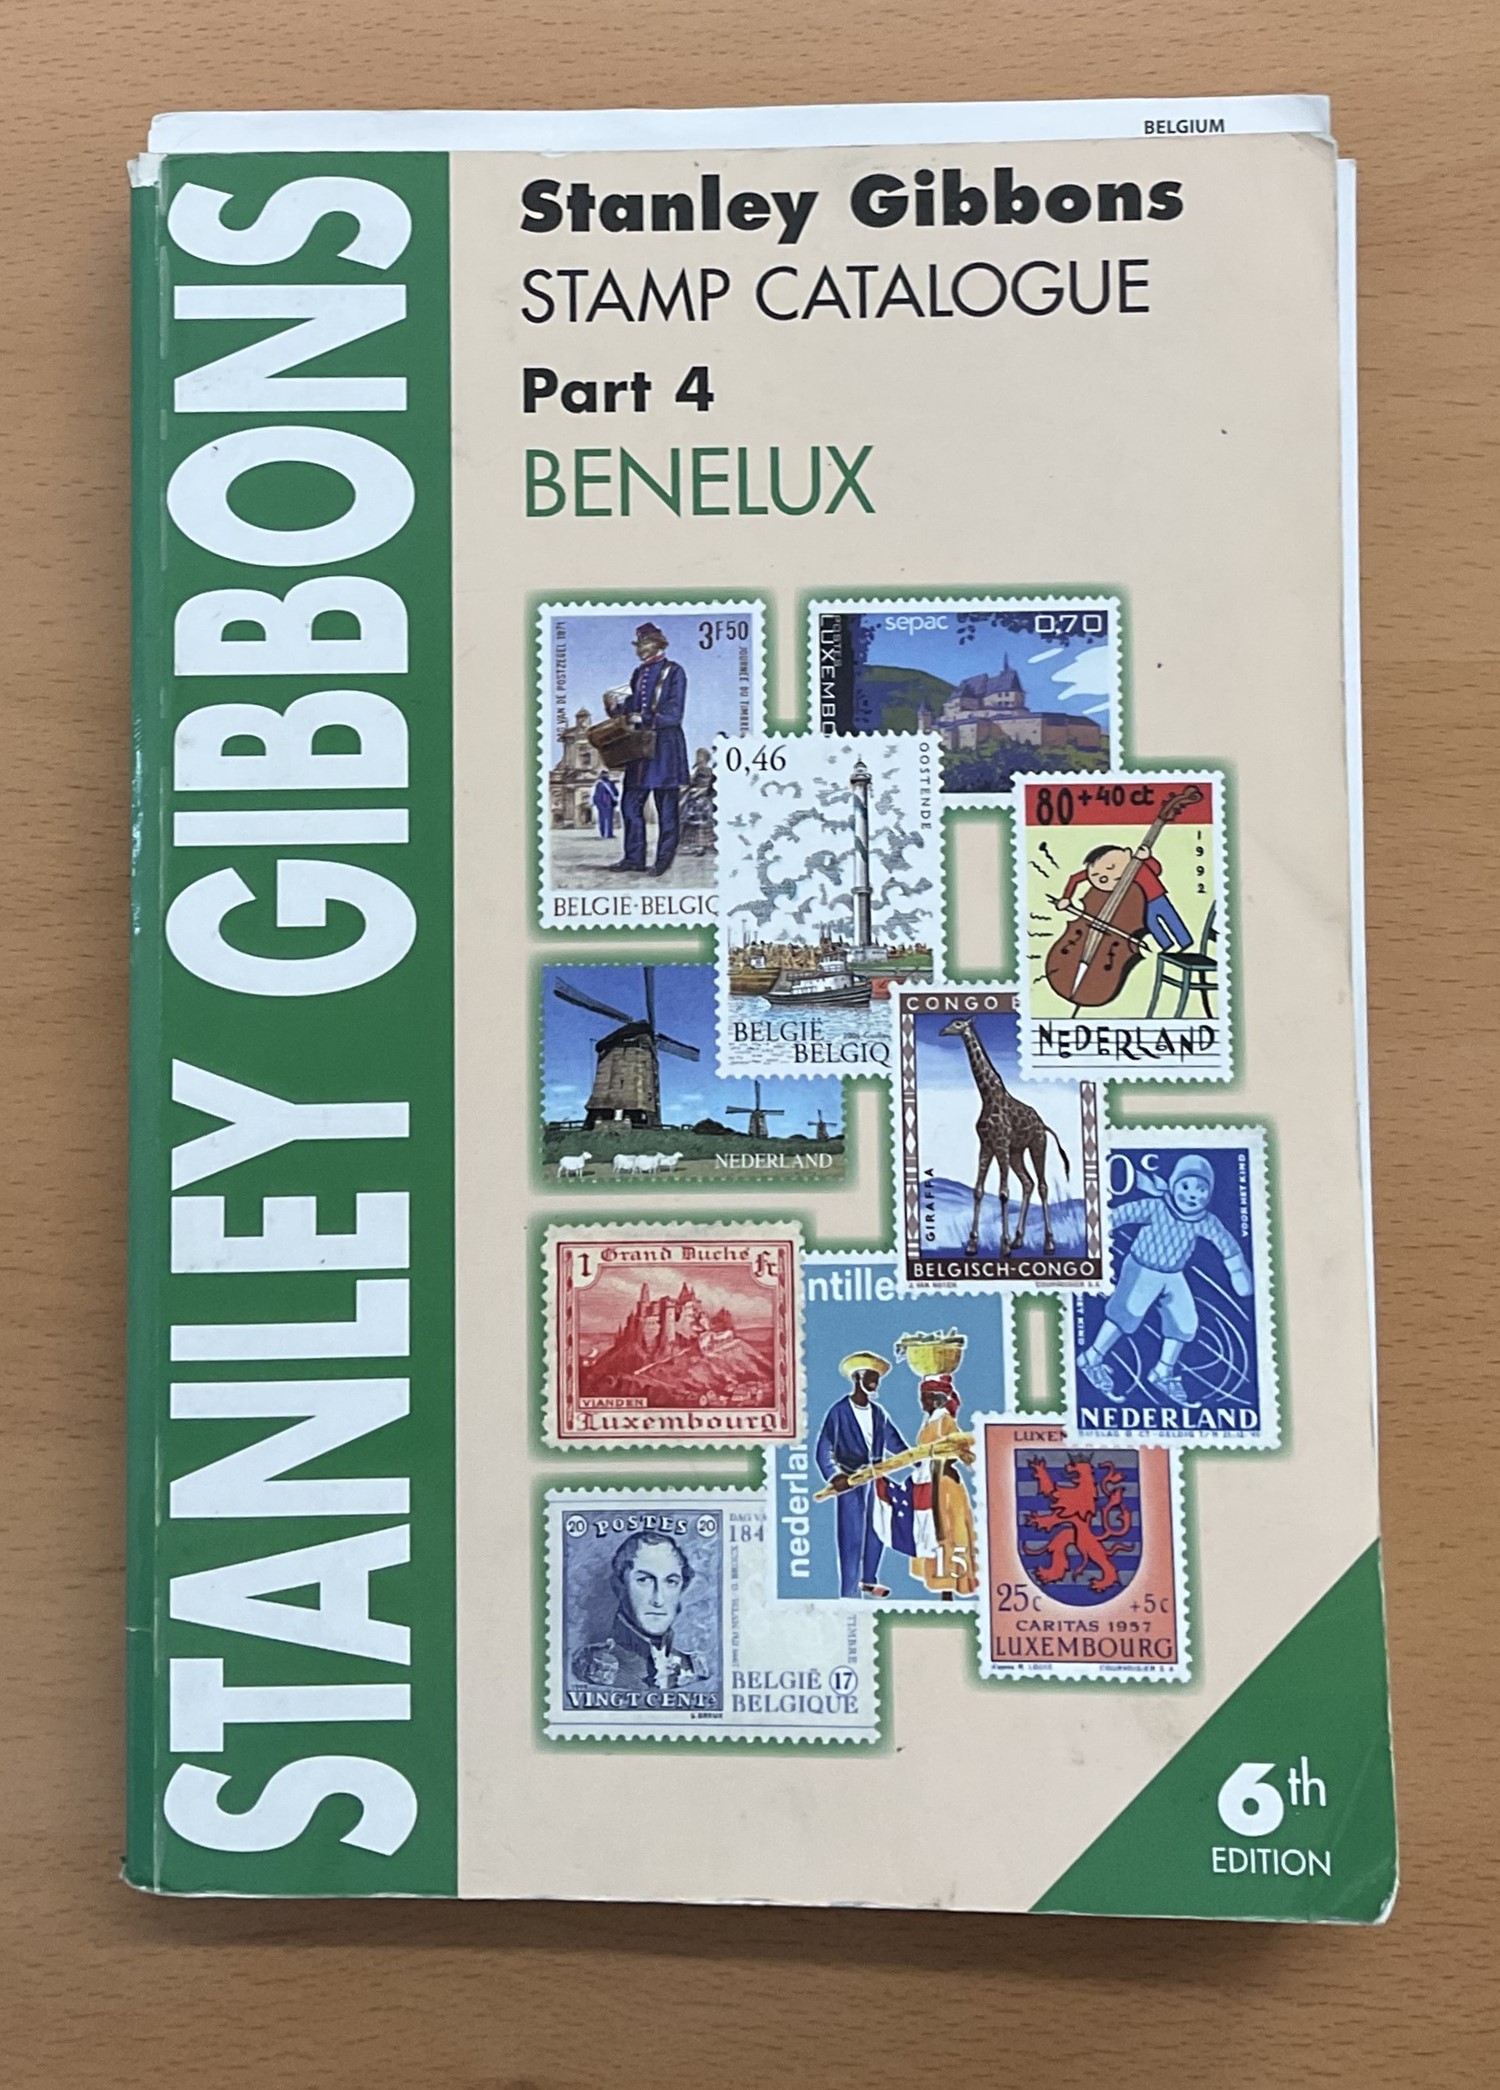 Stanley Gibbons Benelux stamp catalogue 6th Edition. Has damage to inside some pages are becoming